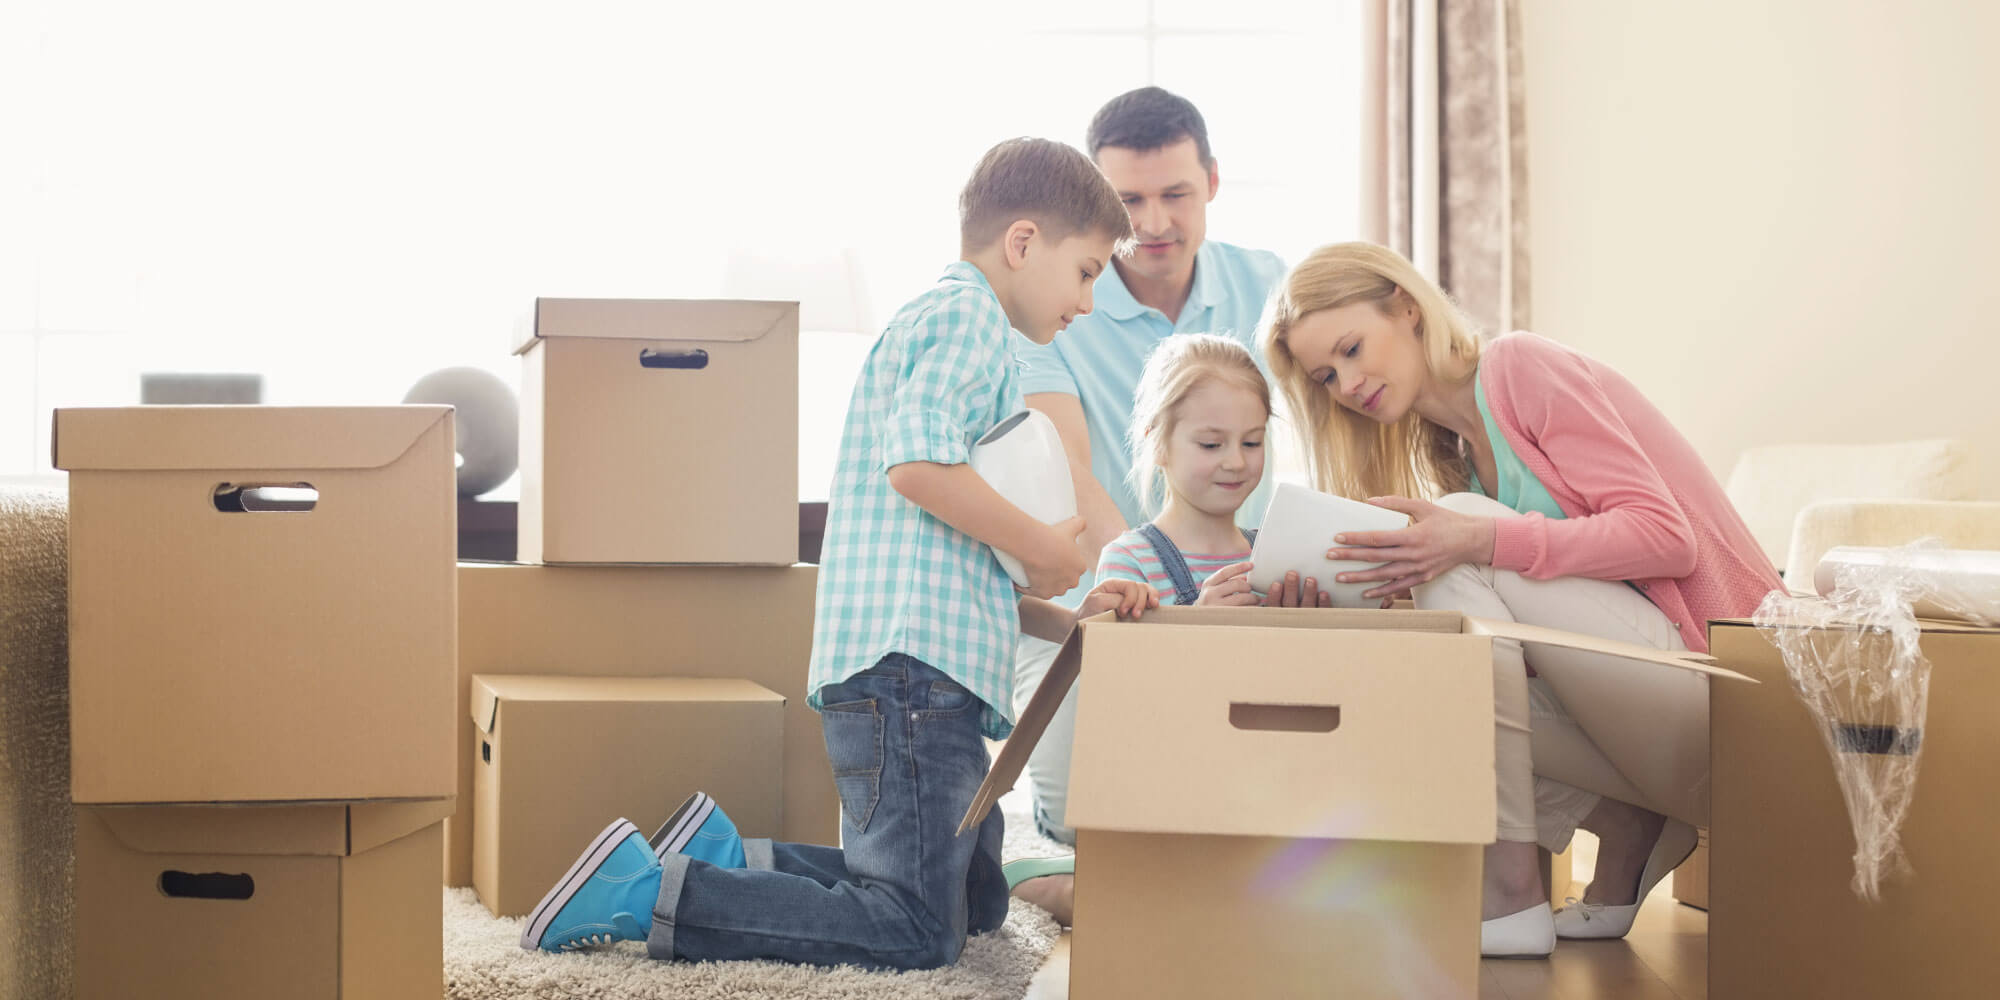 A family of four surrounded by carboard packing boxes in their living room, opening one box together